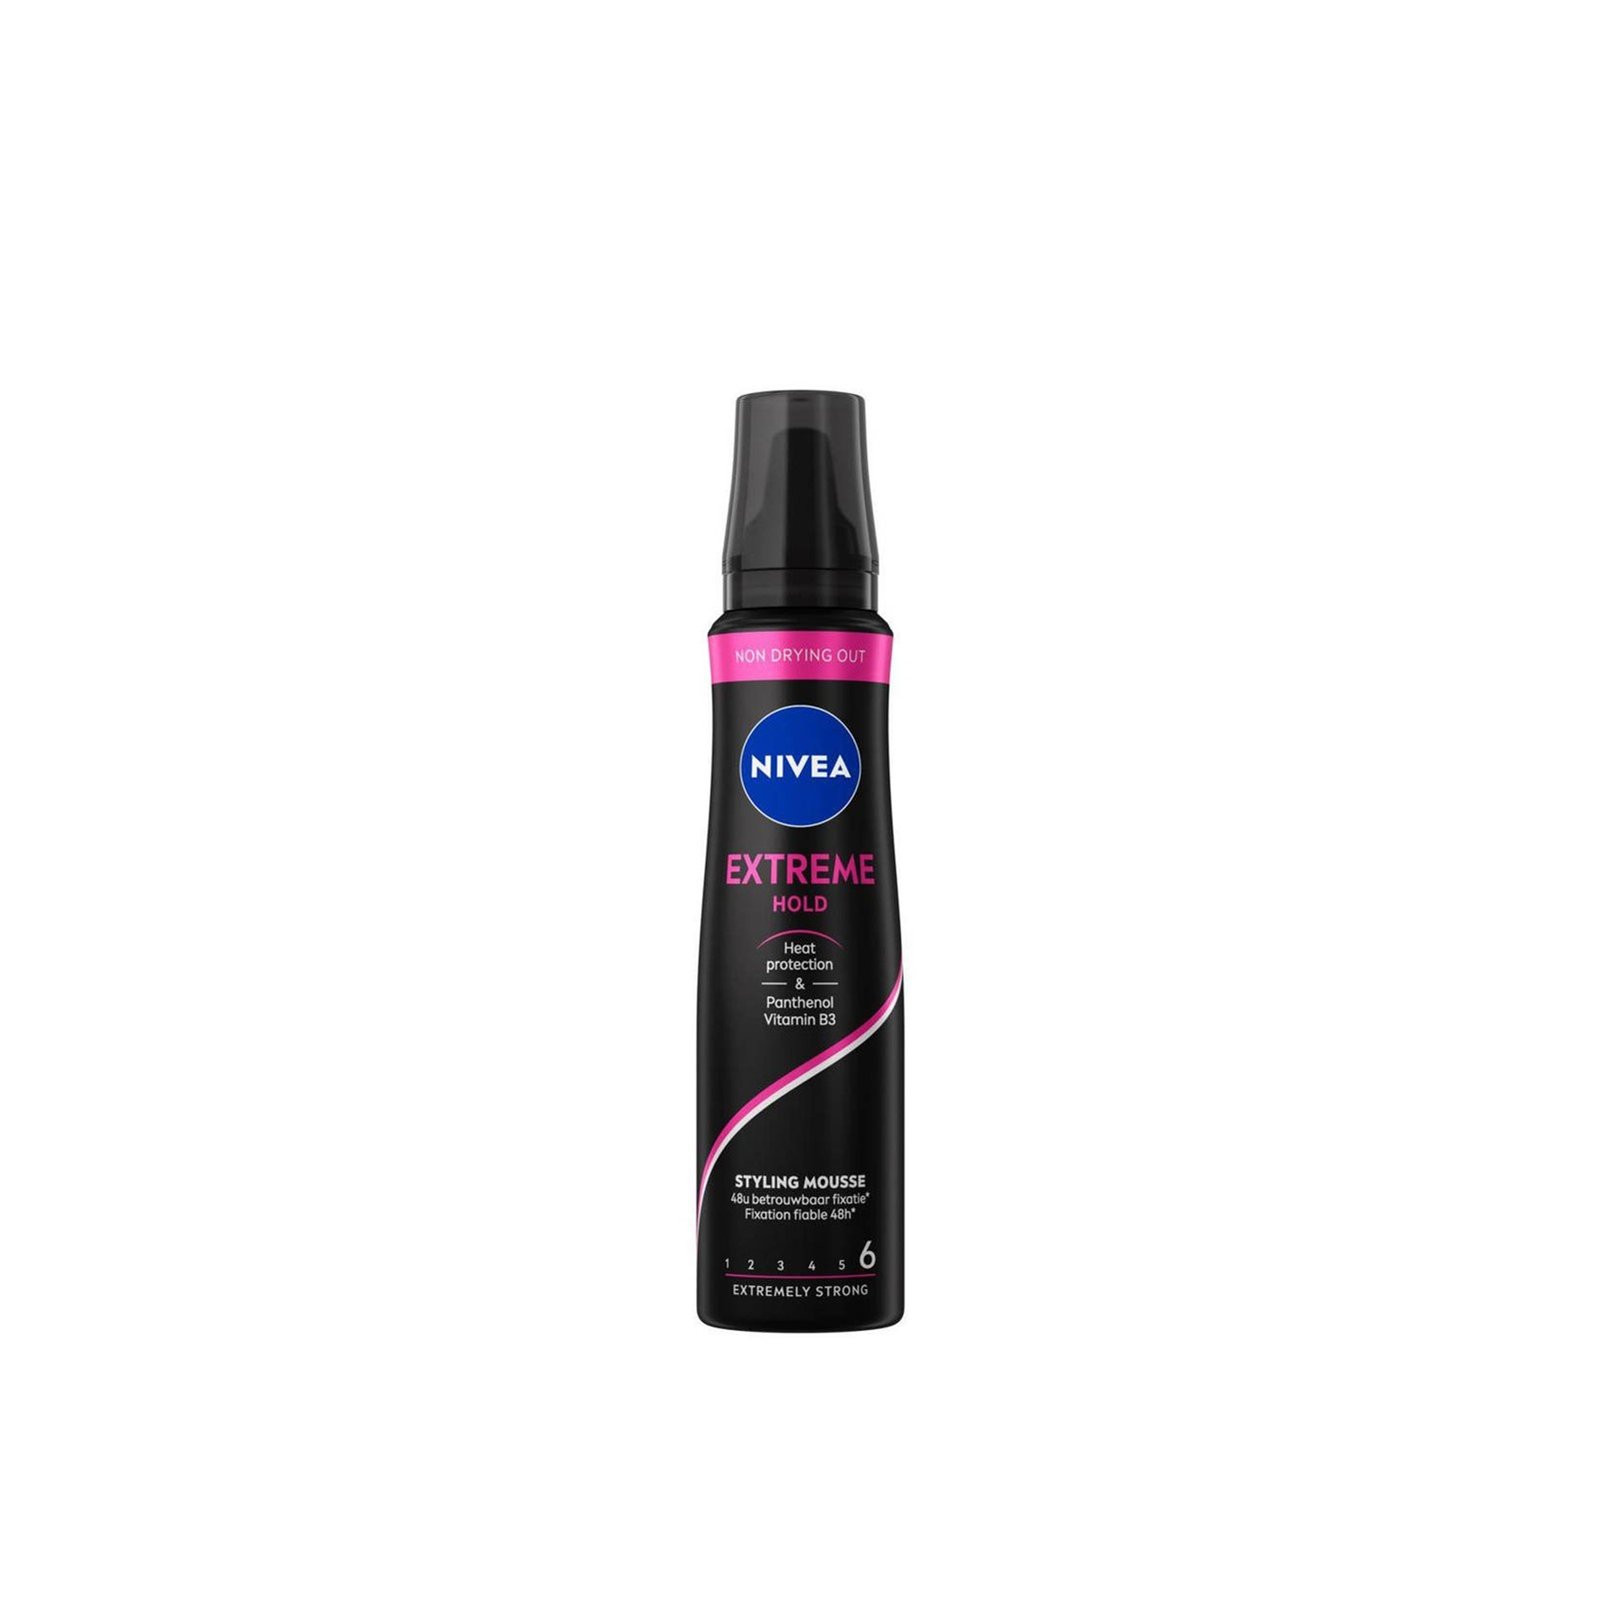 Nivea Extreme Hold Styling Mousse Extremely Strong 150ml